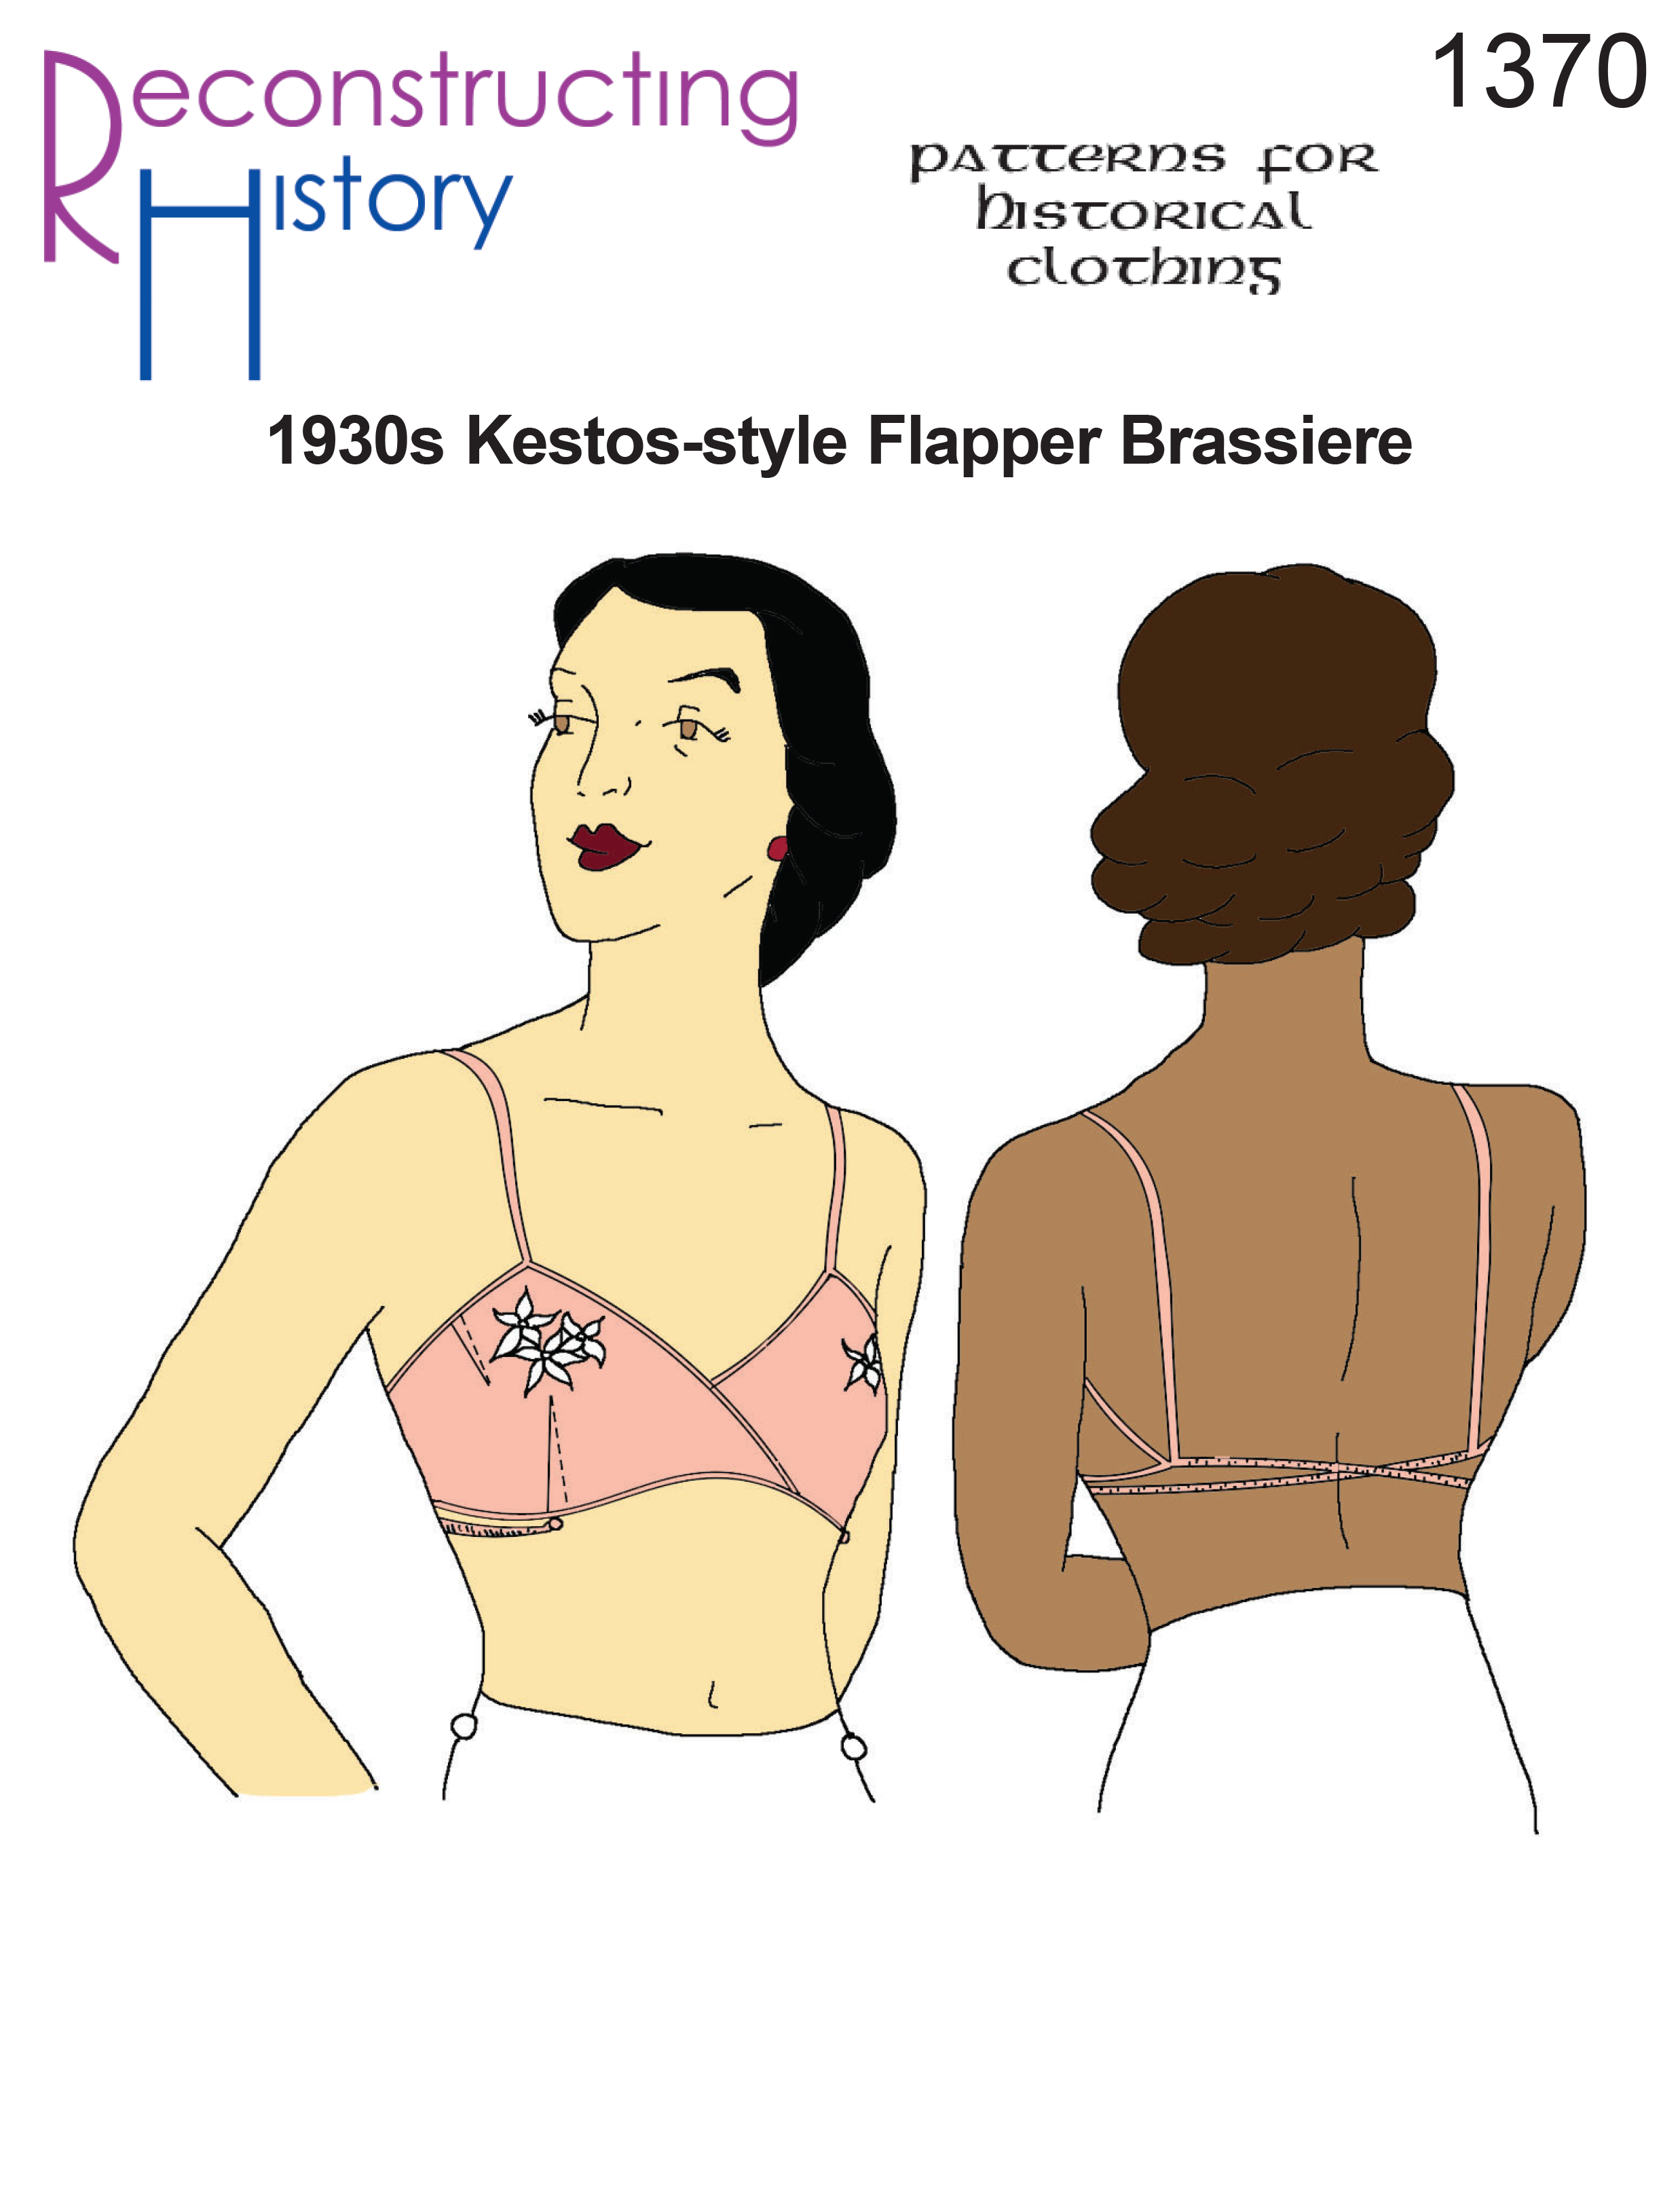 Different Types of Lingerie (A Brief History)